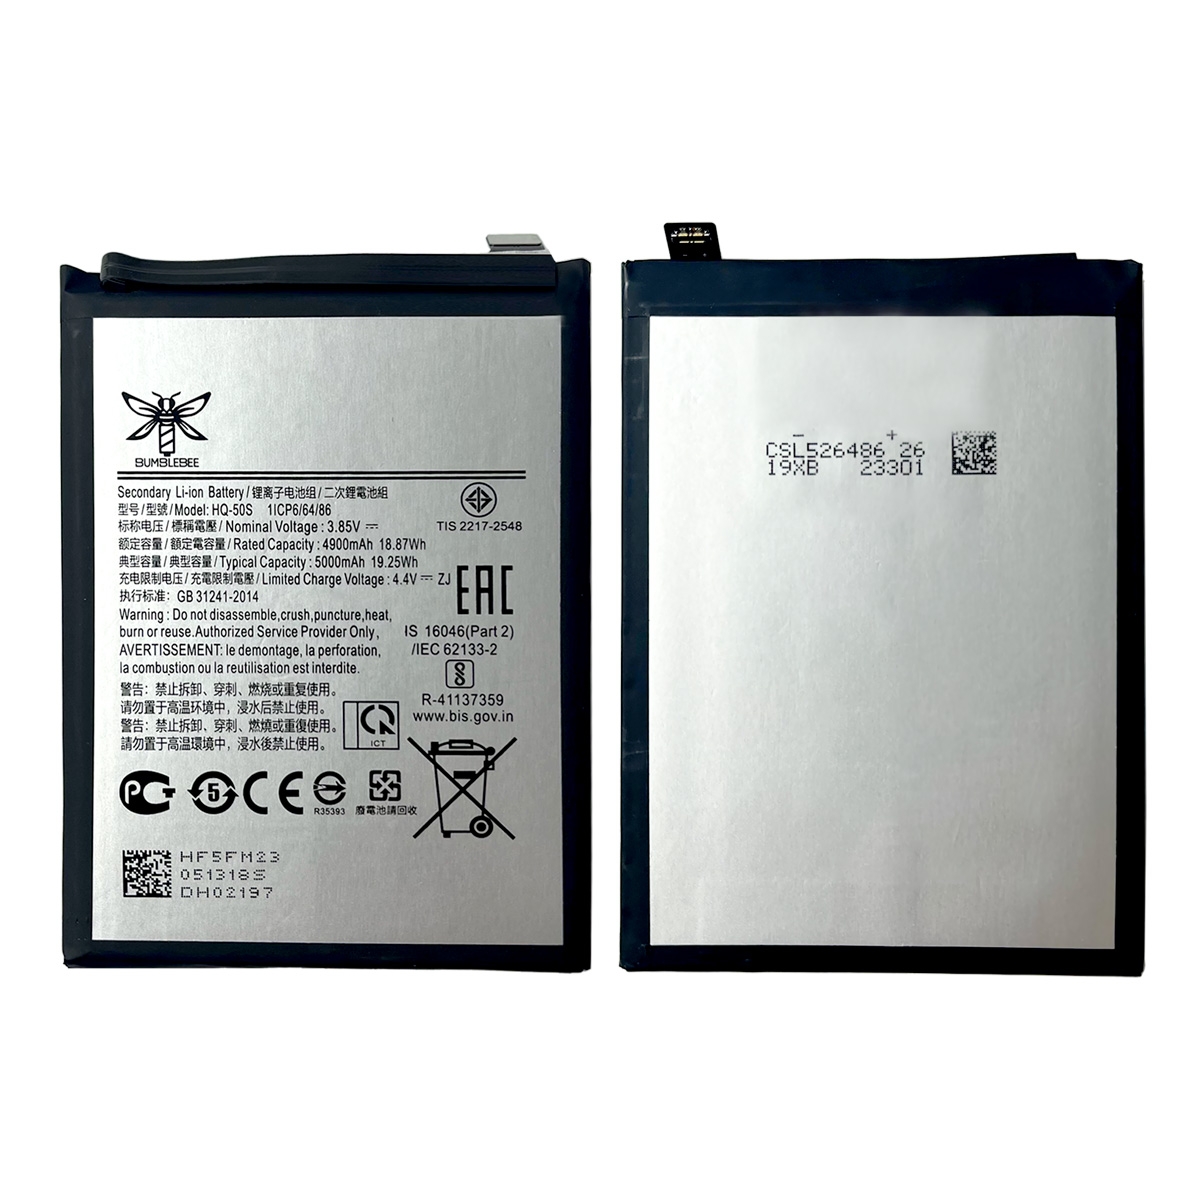 3.85V 4900mAh Battery for Samsung Galaxy A02s (2021) A025/ A03s (2021) A037 (HQ-50S)